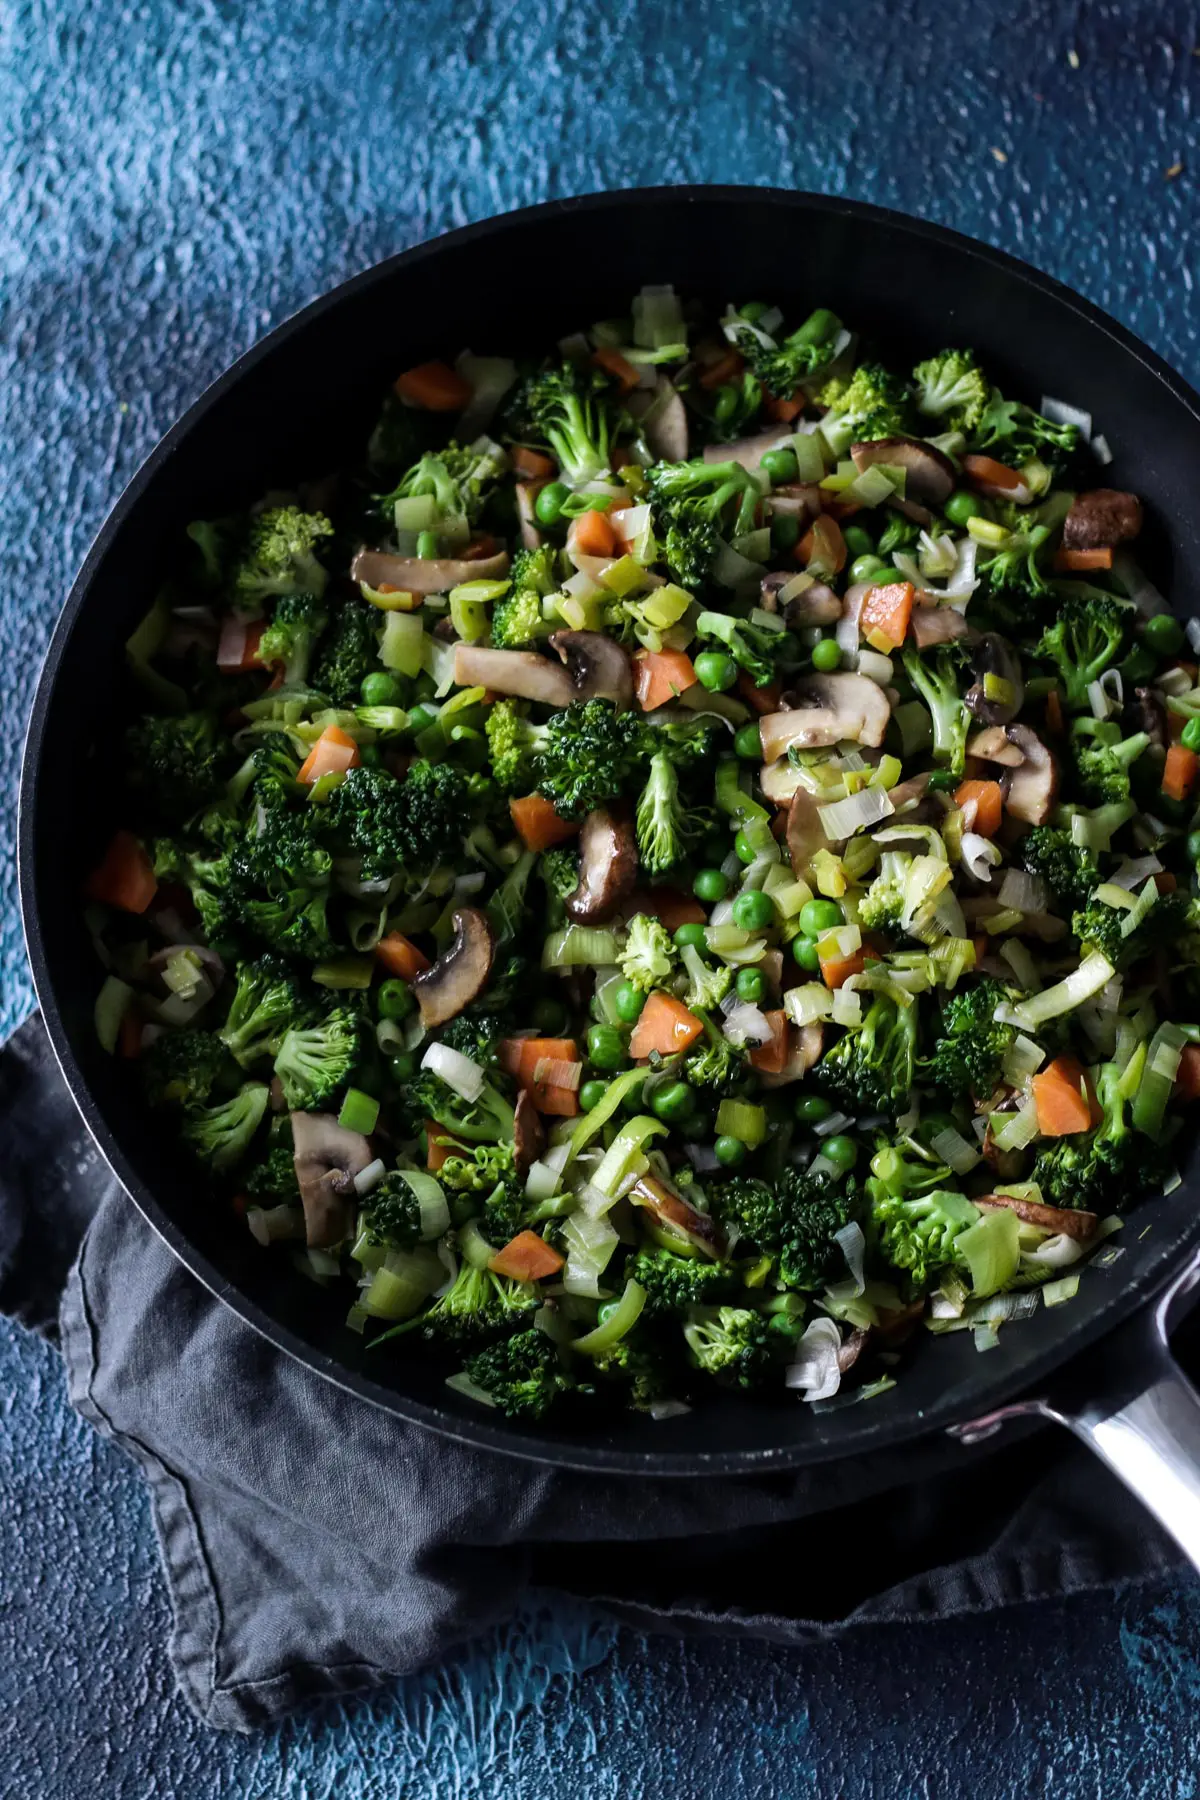 Chopped Vegetables in a Skillet